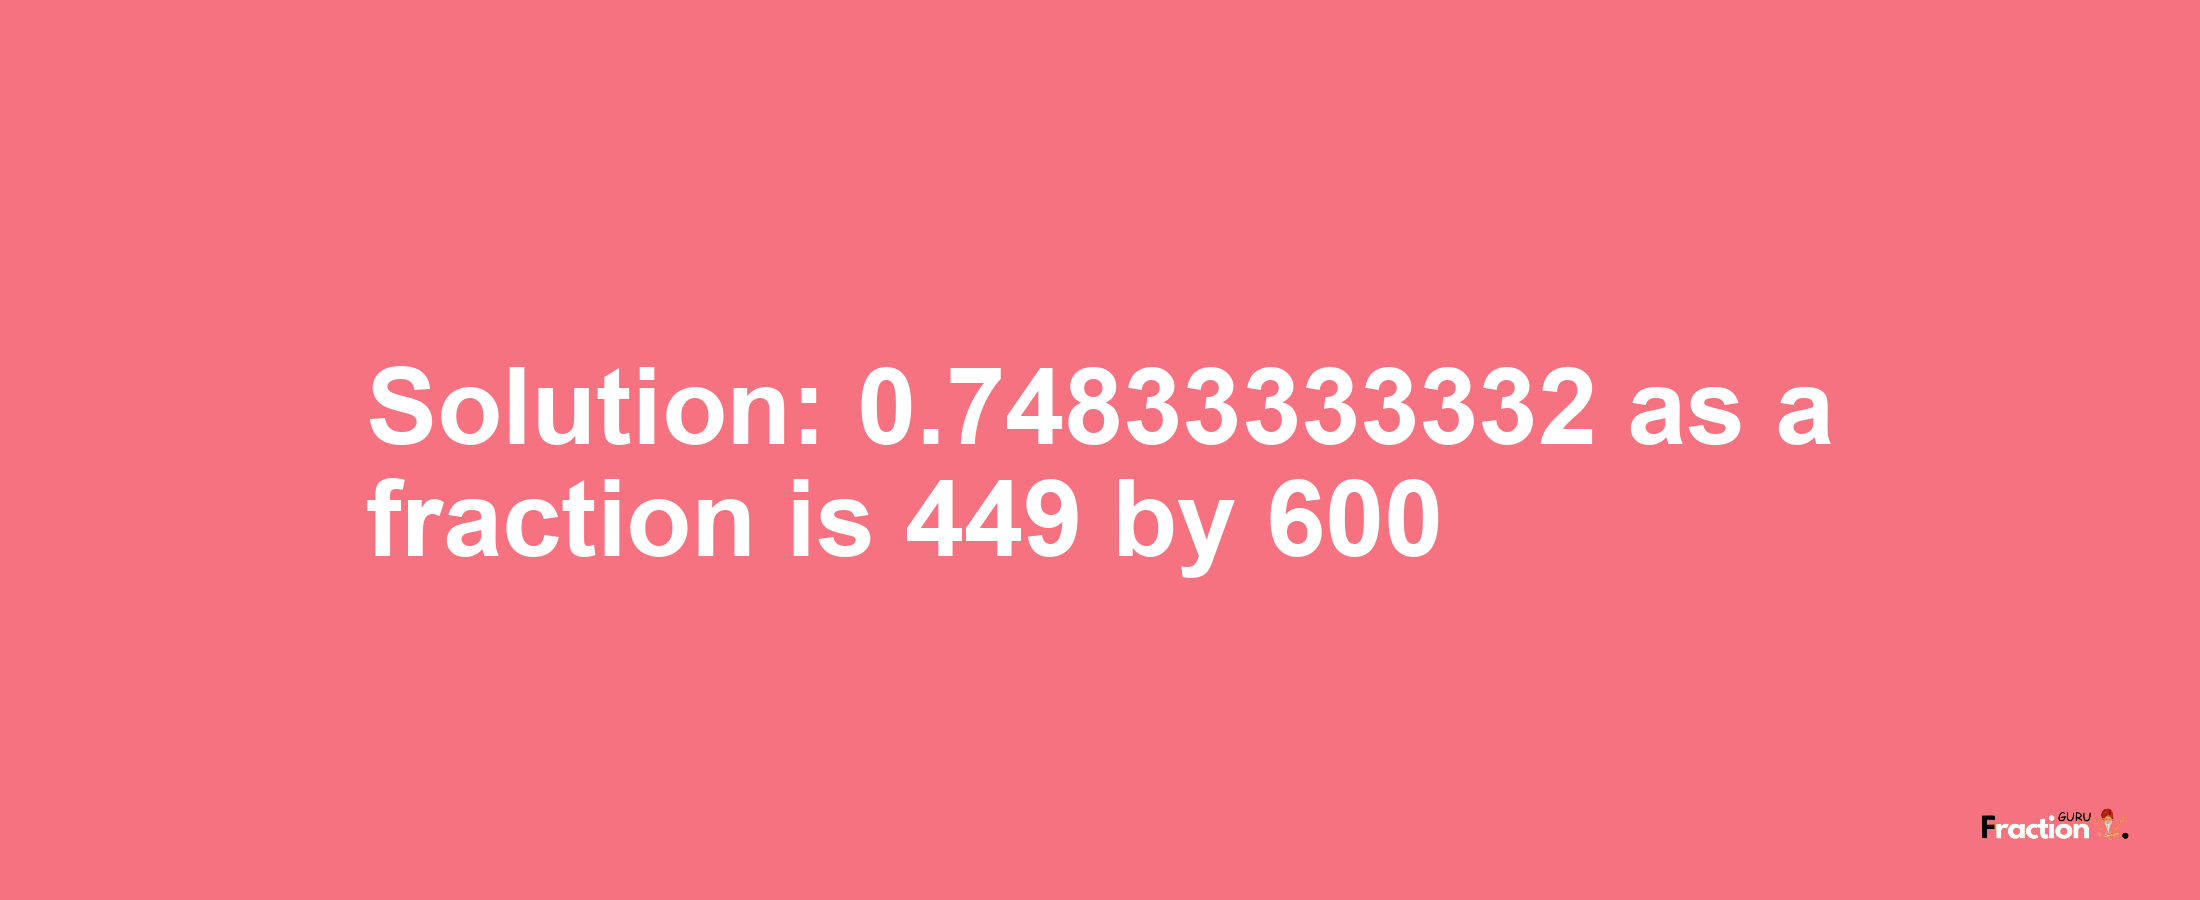 Solution:0.74833333332 as a fraction is 449/600